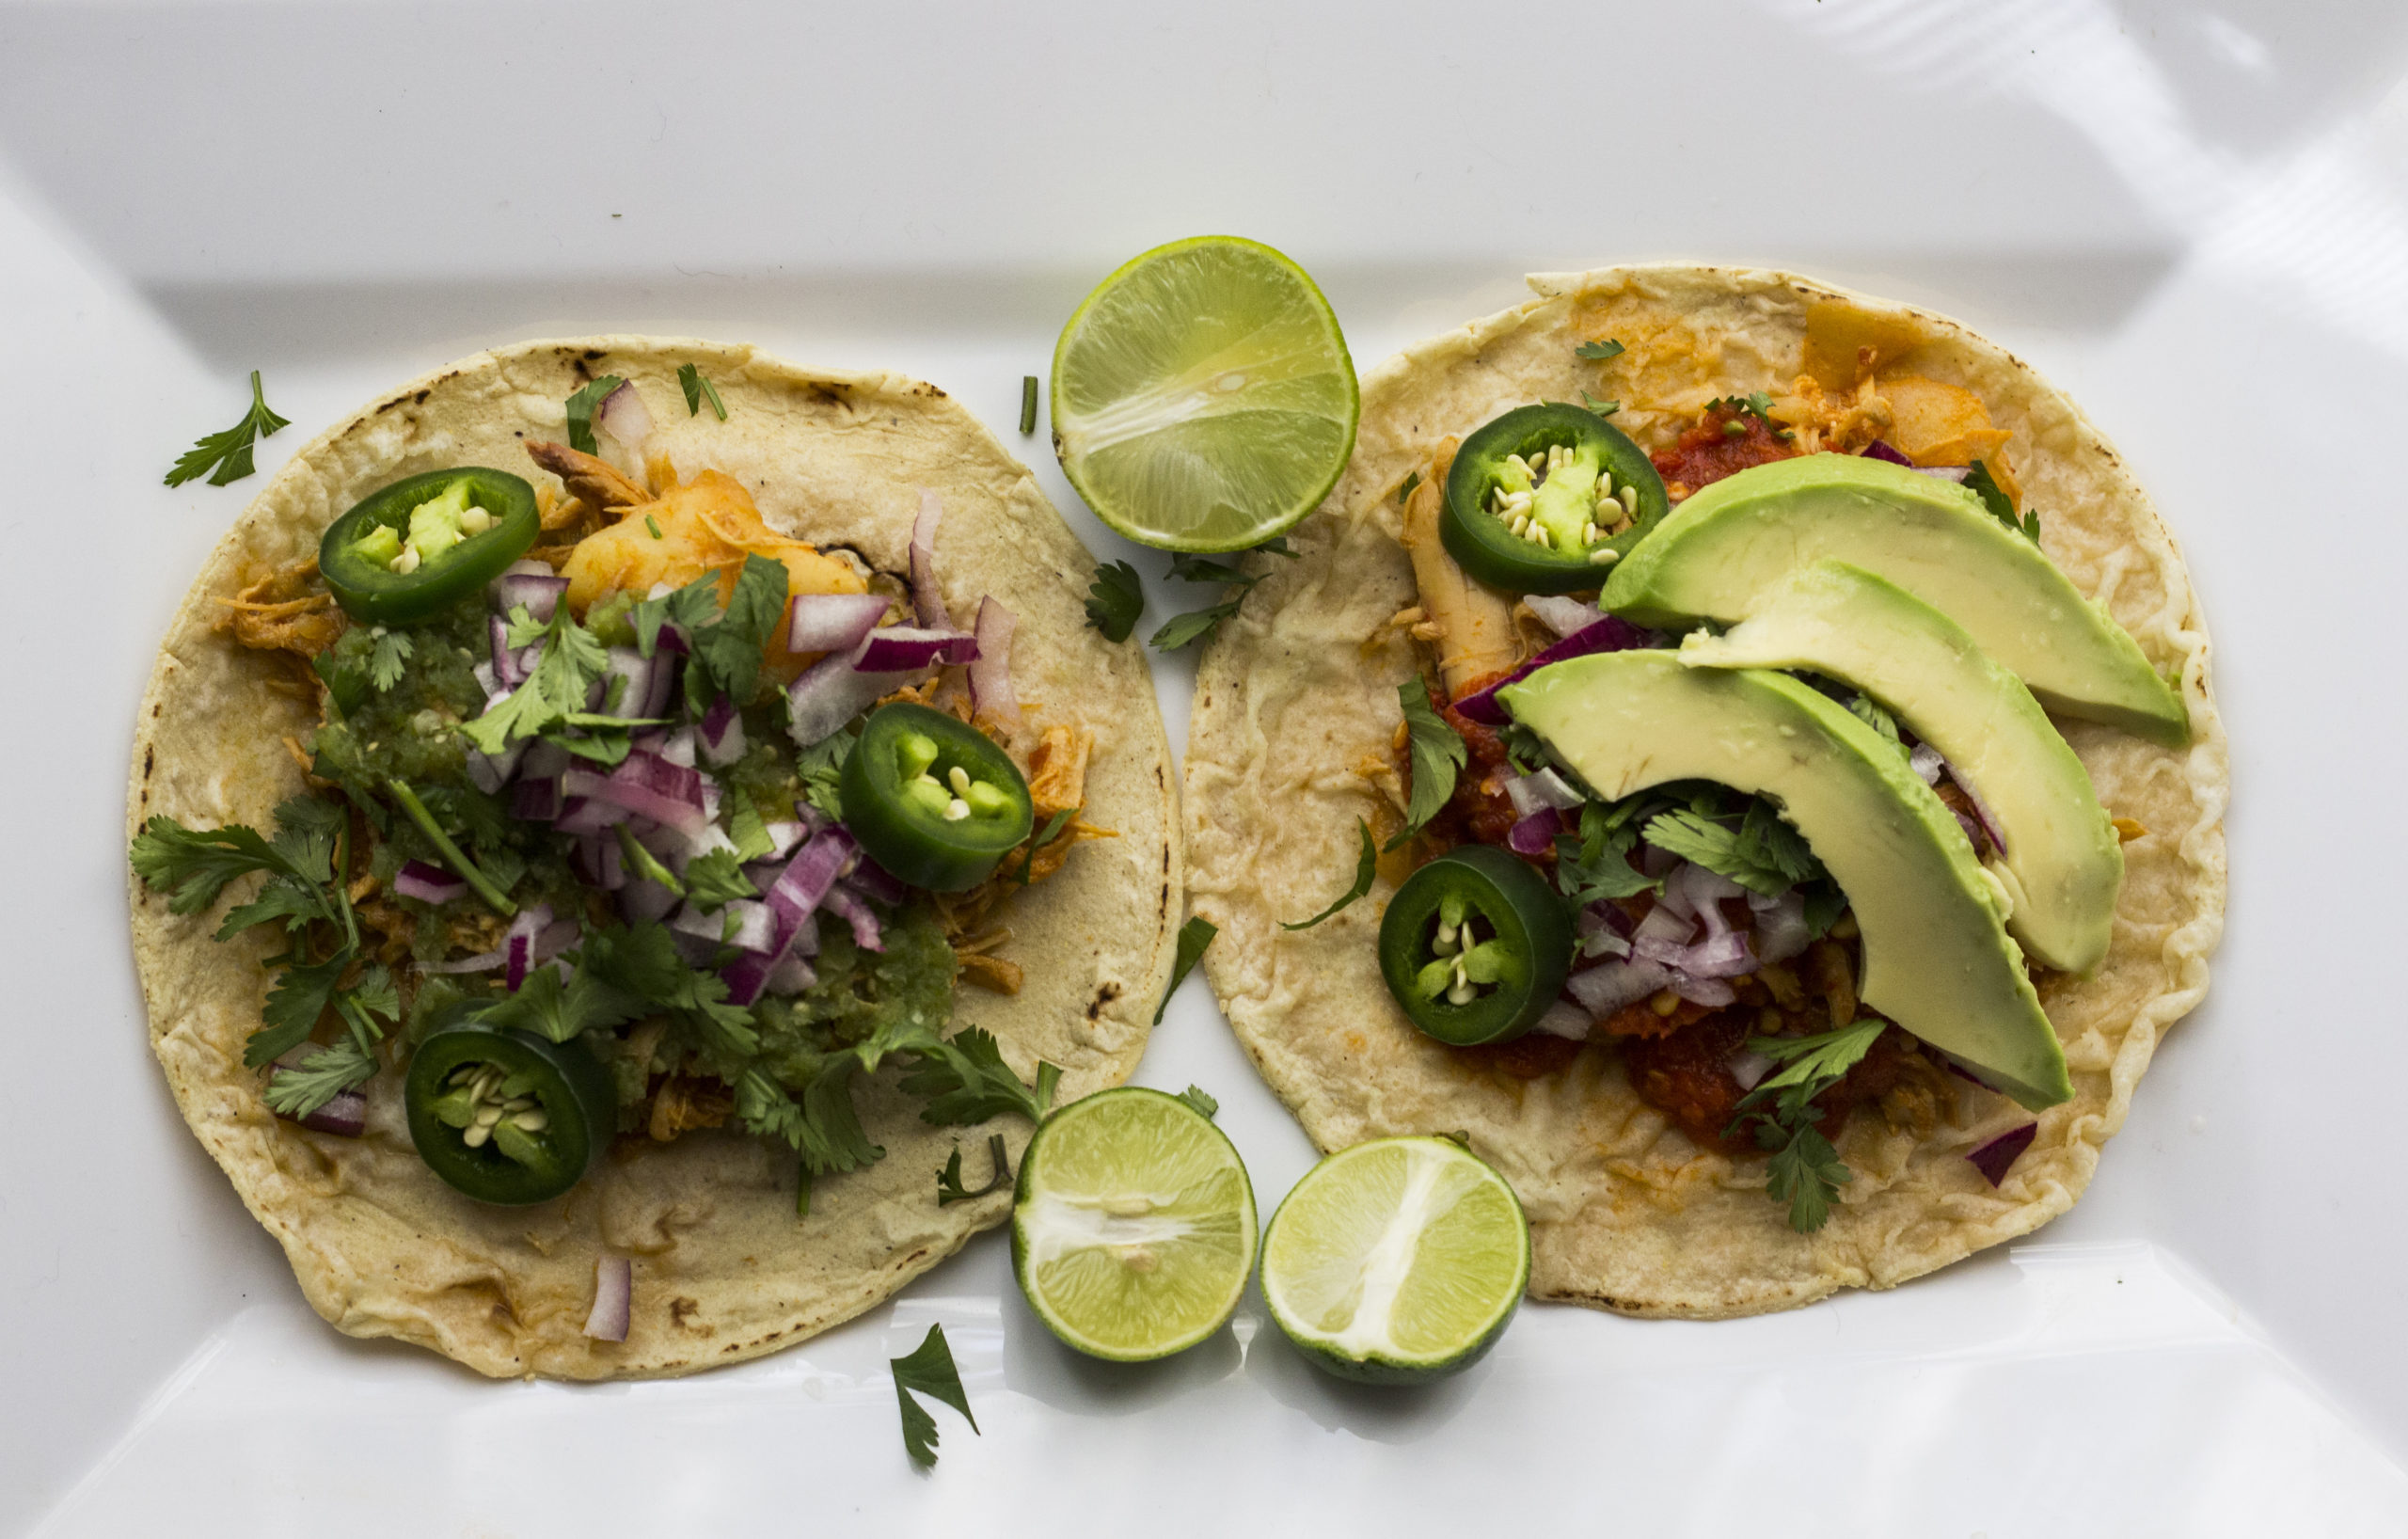 i-had-to-do-mexican-food-shoot-a-few-weeks-ago-this-are-tacos-de-tinga-topped-with-cilantro-purple_t20_oExXz4